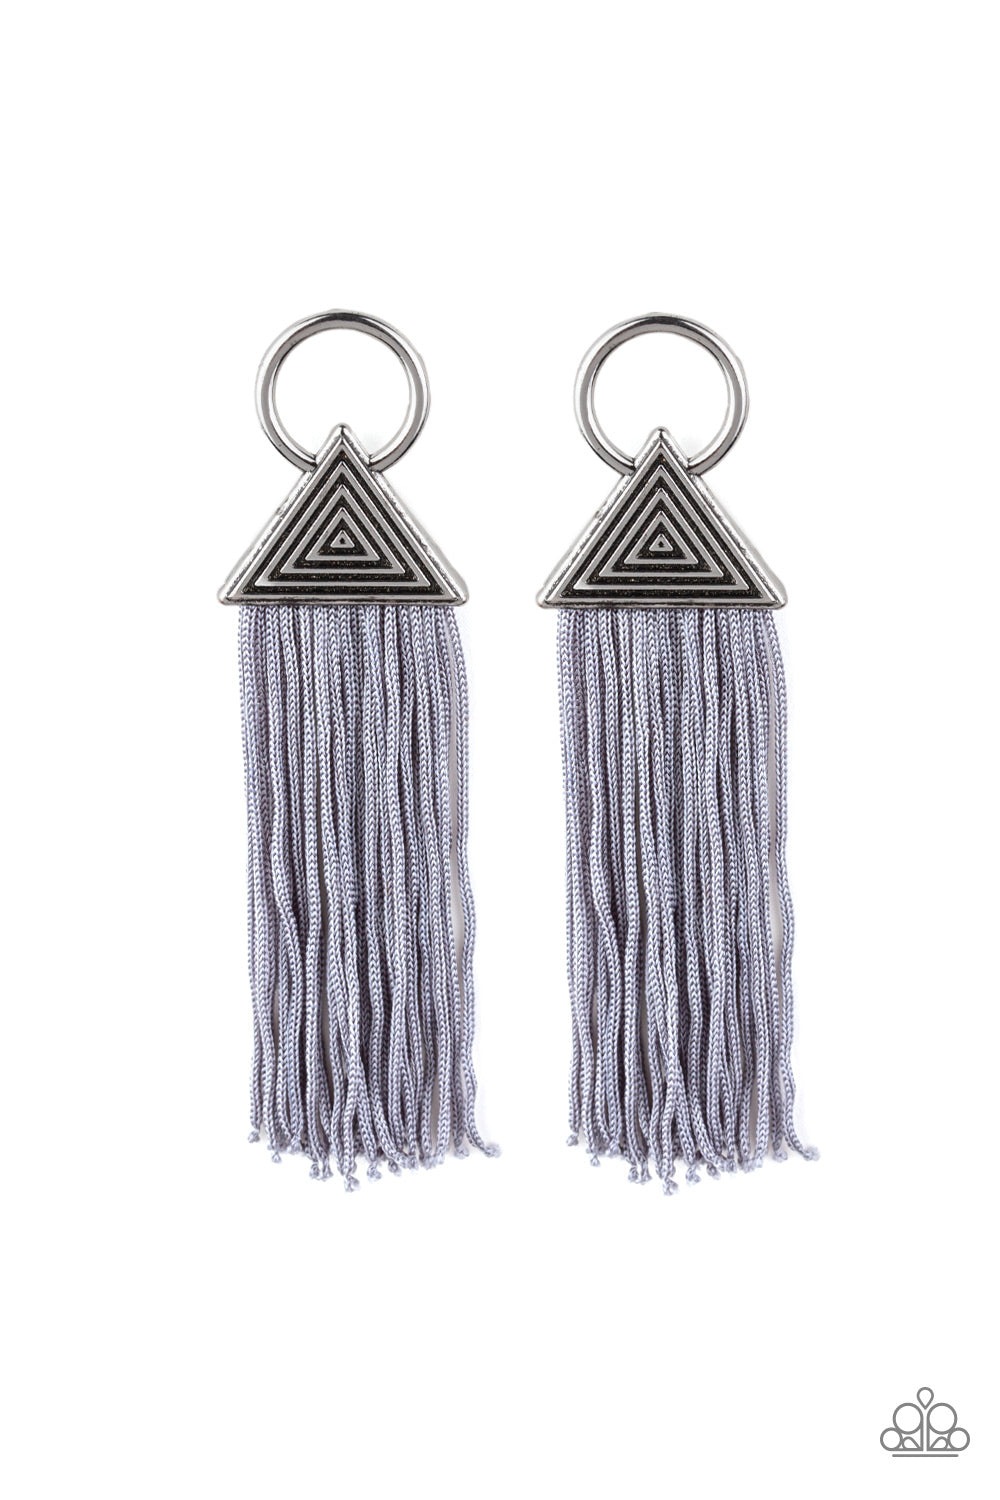 Paparazzi Accessories Oh My GIZA - Silver Earrings - Lady T Accessories